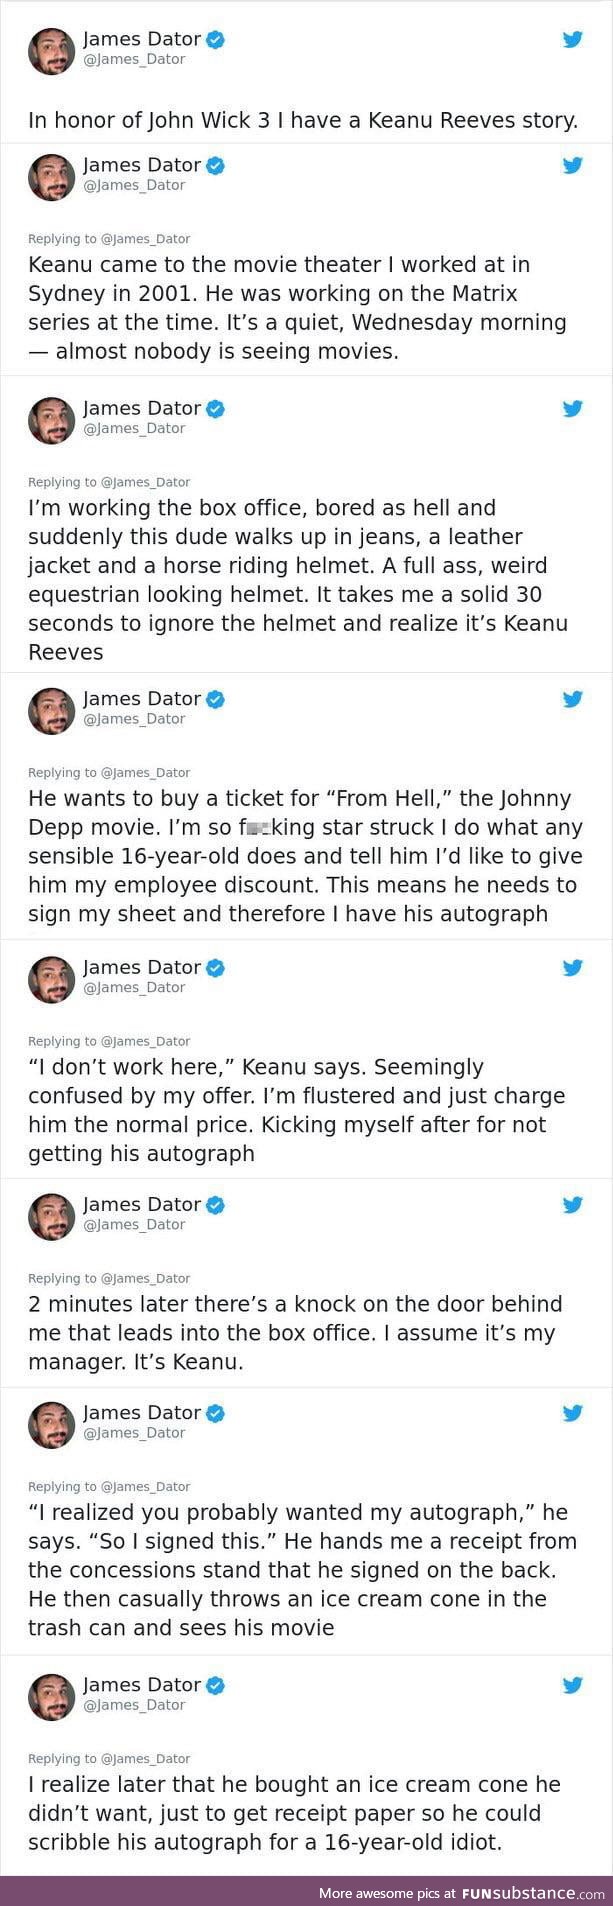 Just another story of Keanu Reeves being Bro